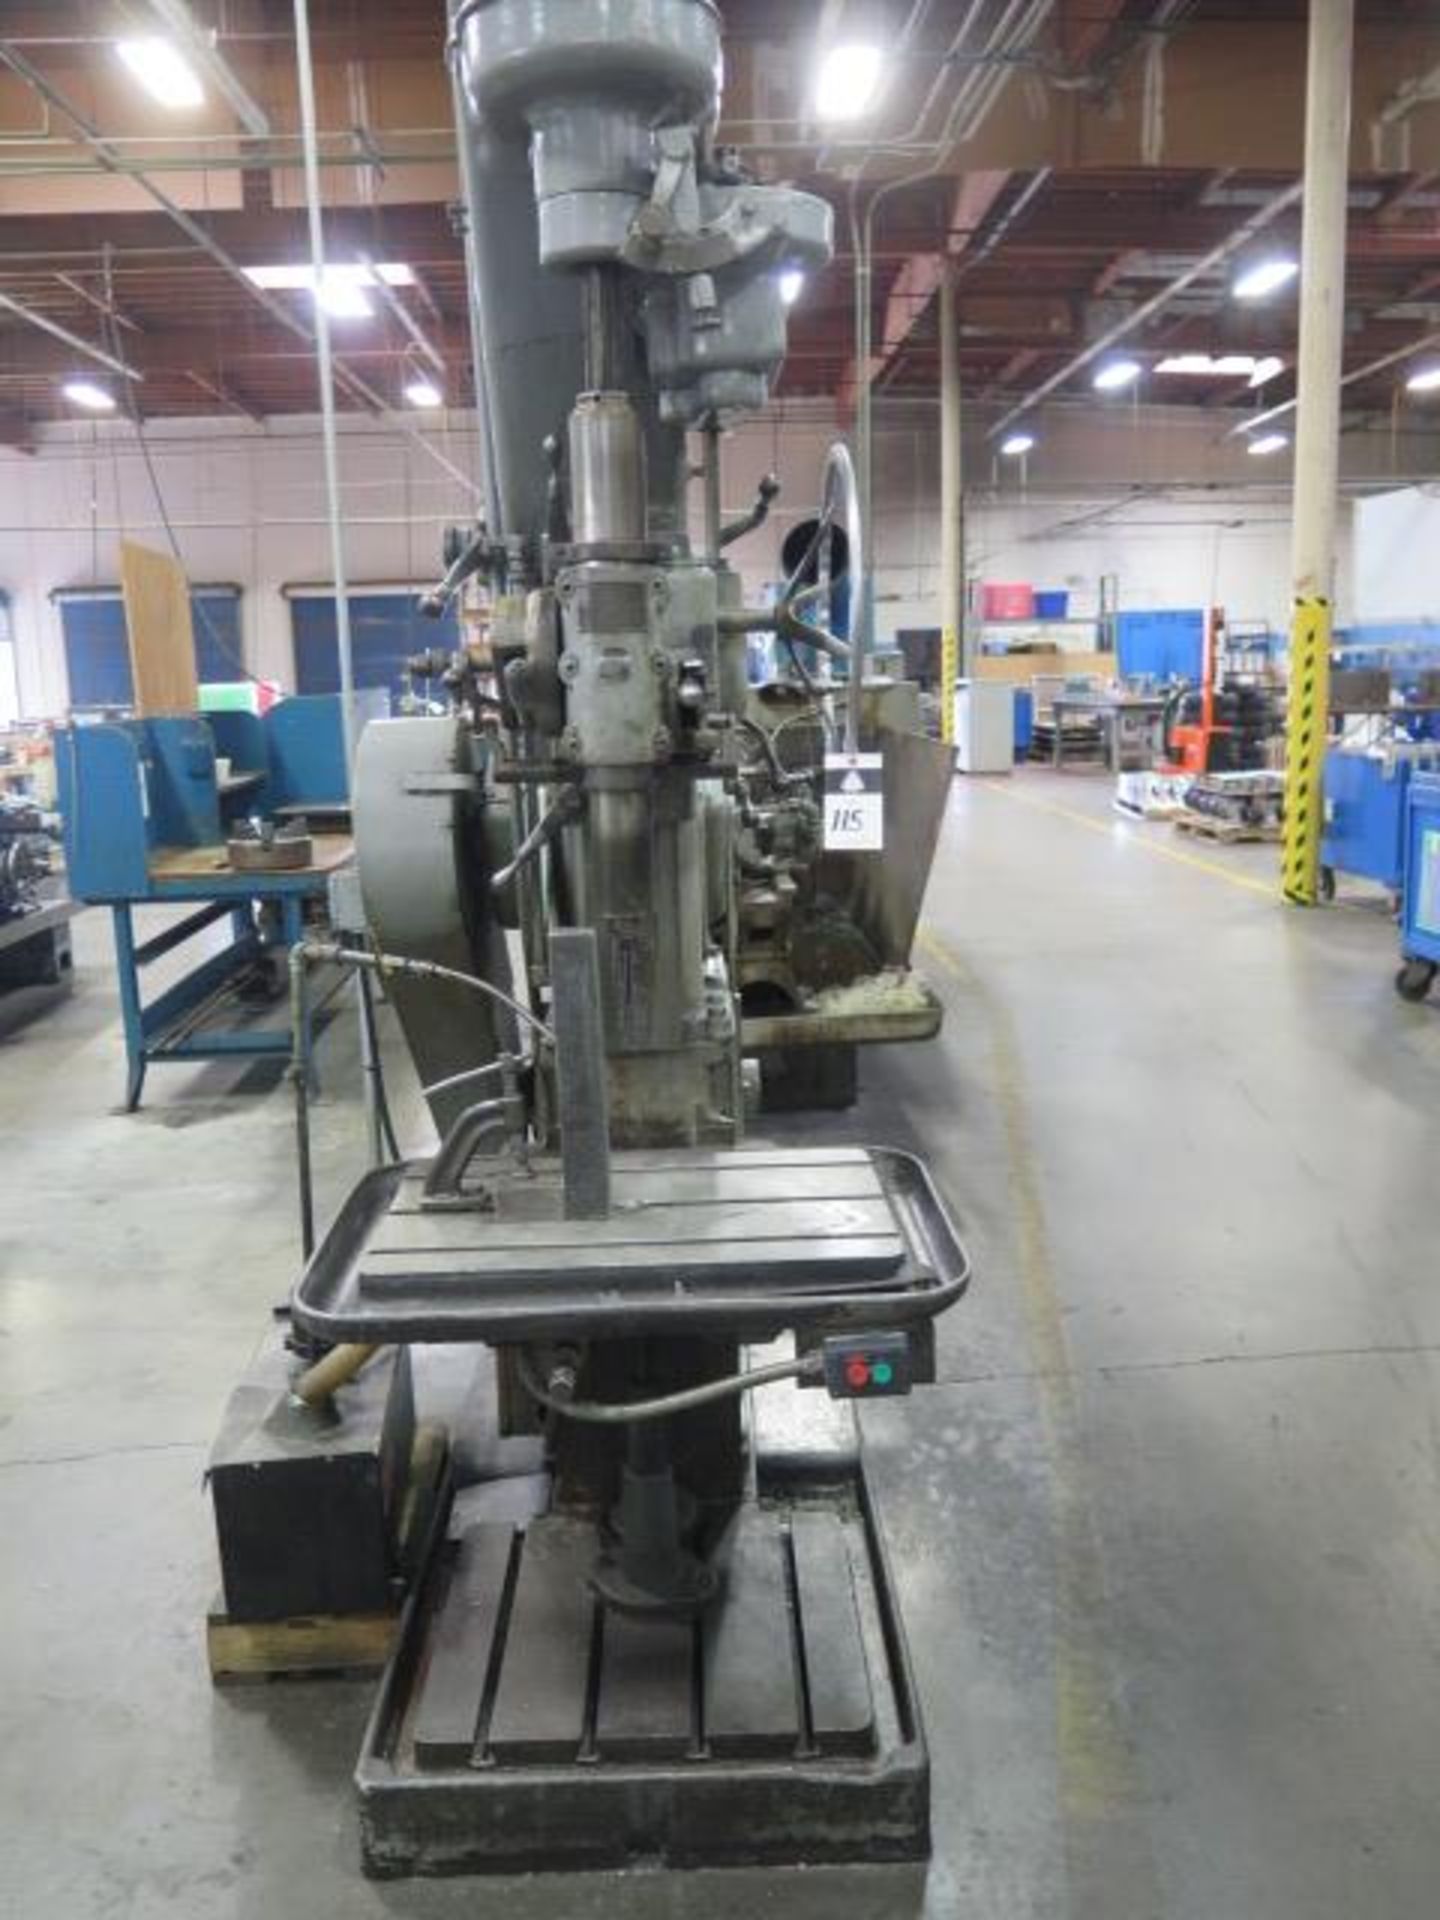 Barnes No. 262 Sliding Head Drill w/ 90-500 Geared RPM, Power Feed, 18" x 28" Table, SOLD AS IS - Image 2 of 7